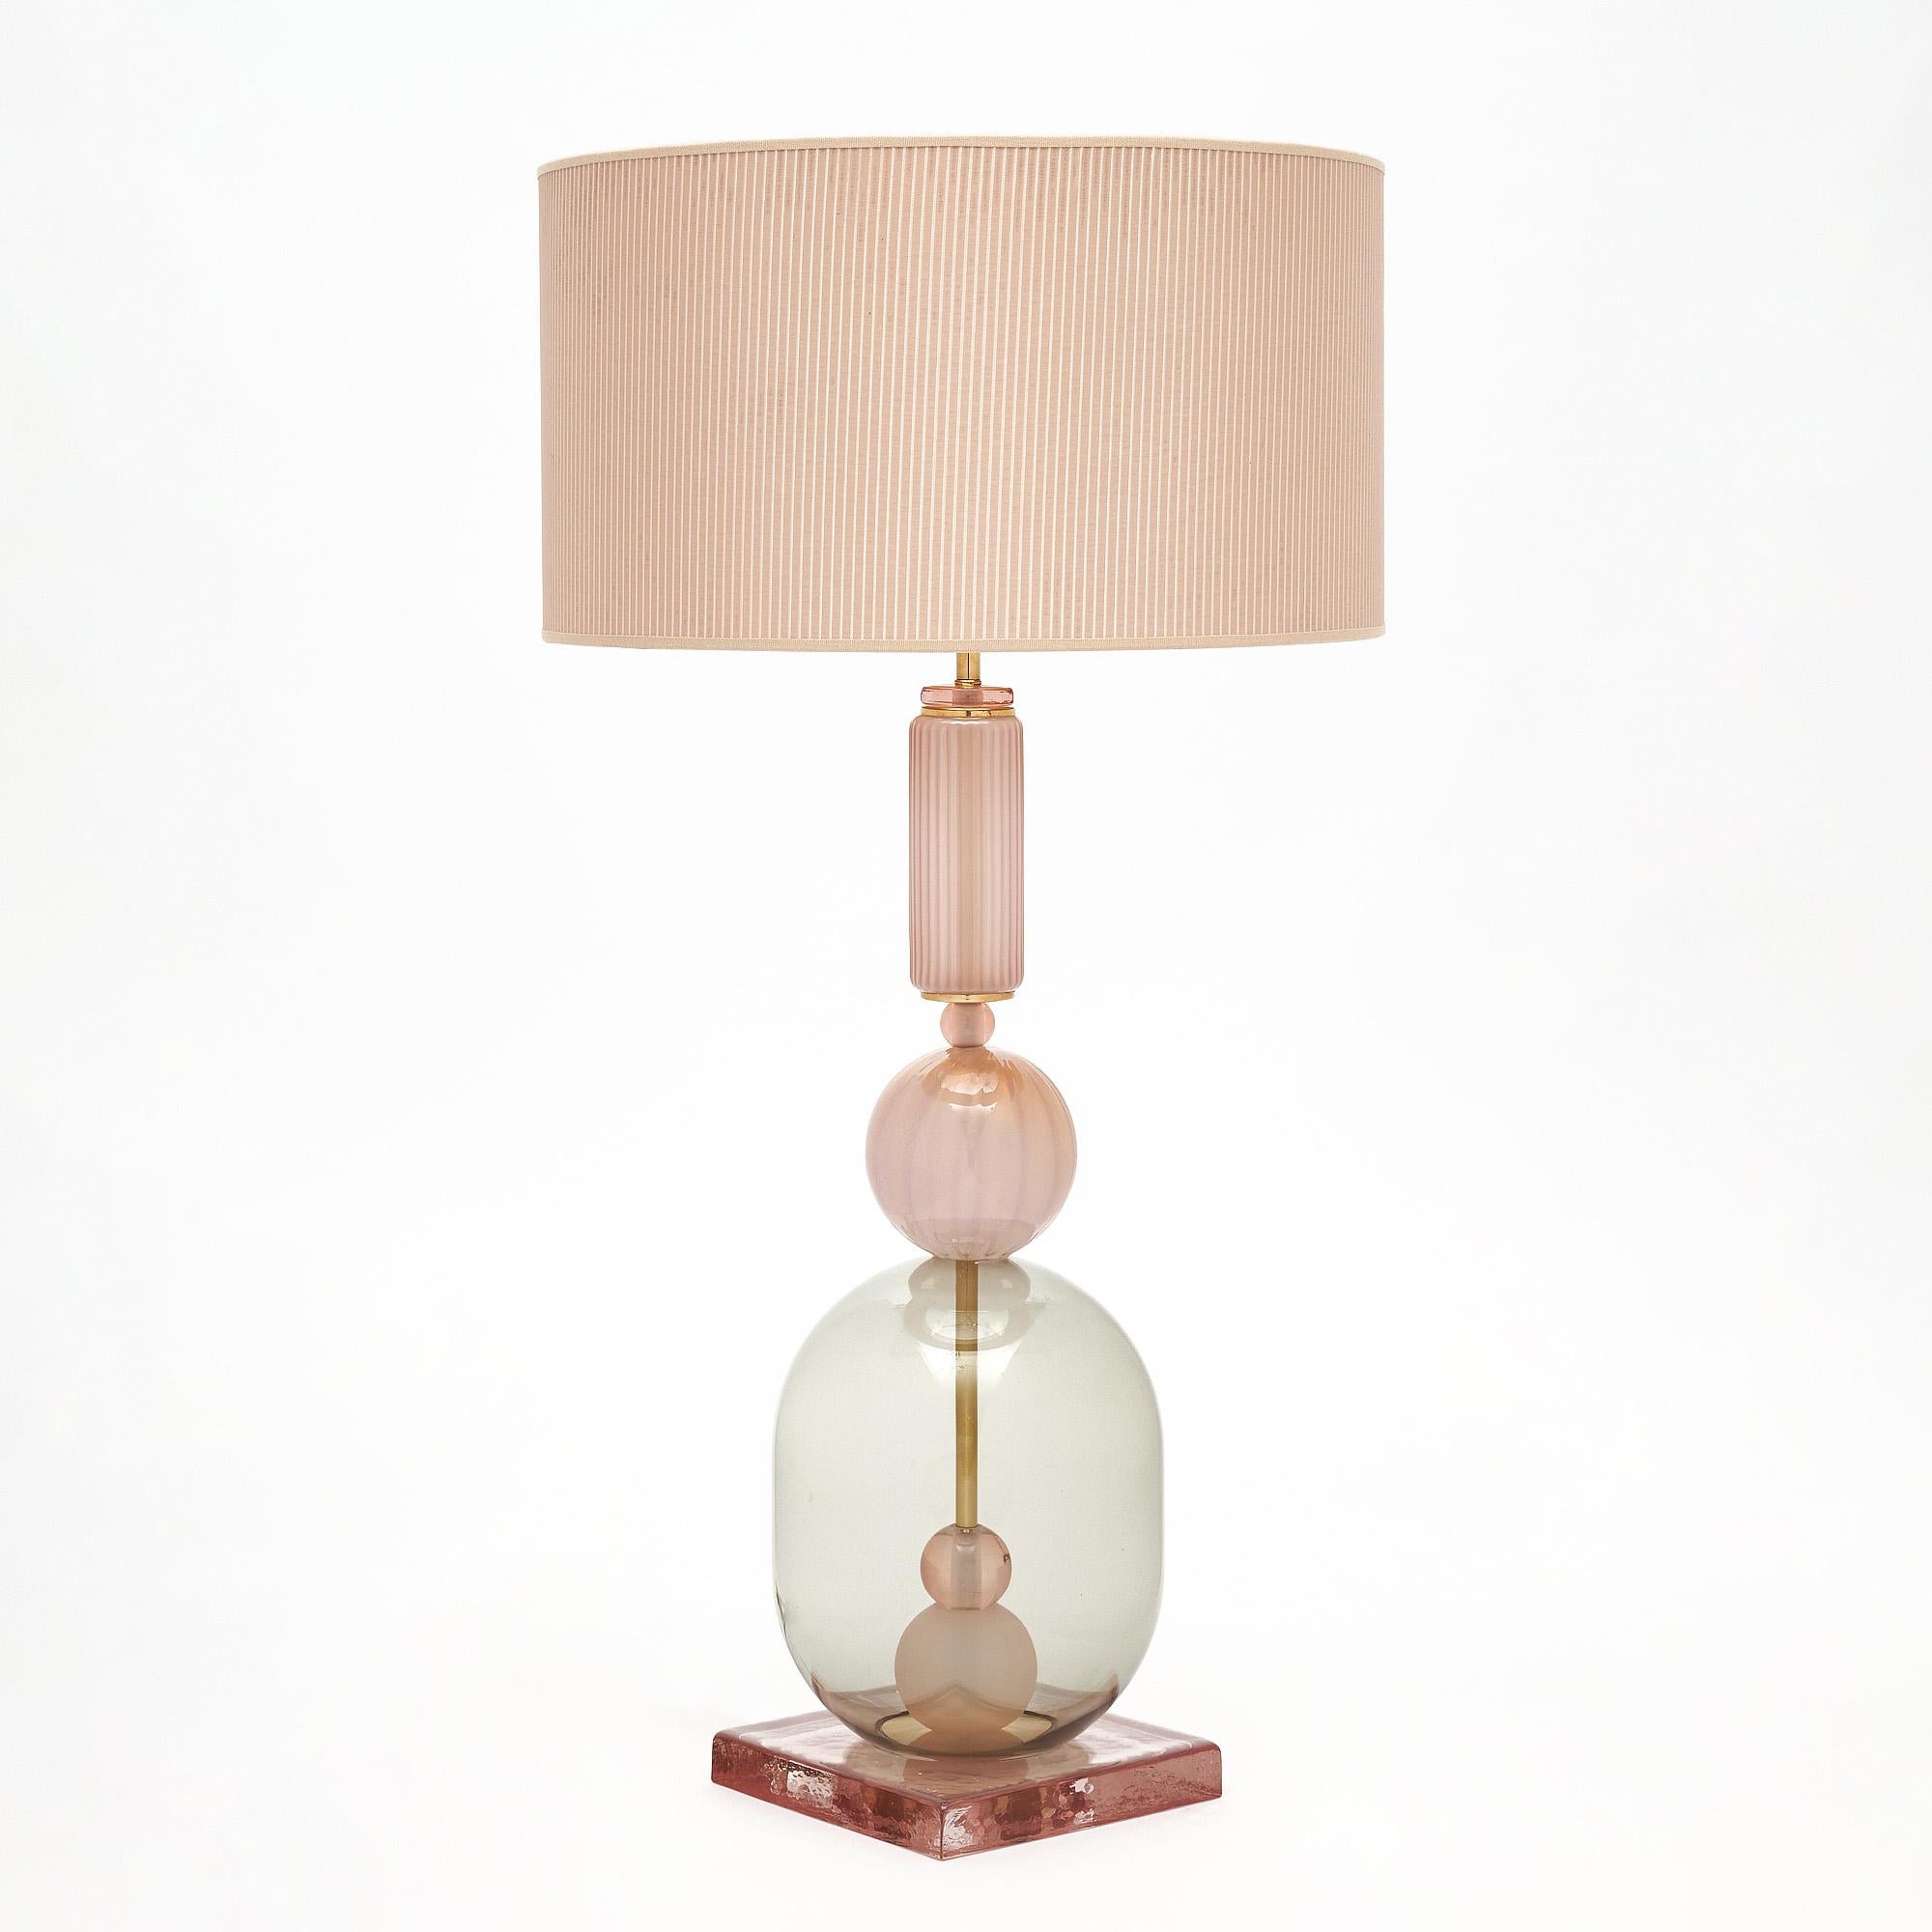 Pair of hand-blown Murano glass lamps featuring unique glass components supported on a brass structure. In the style of iconic Italian designer Ettore Sotsass. We love the pink tone to the glass and the geometric forms that have a strong impact to a